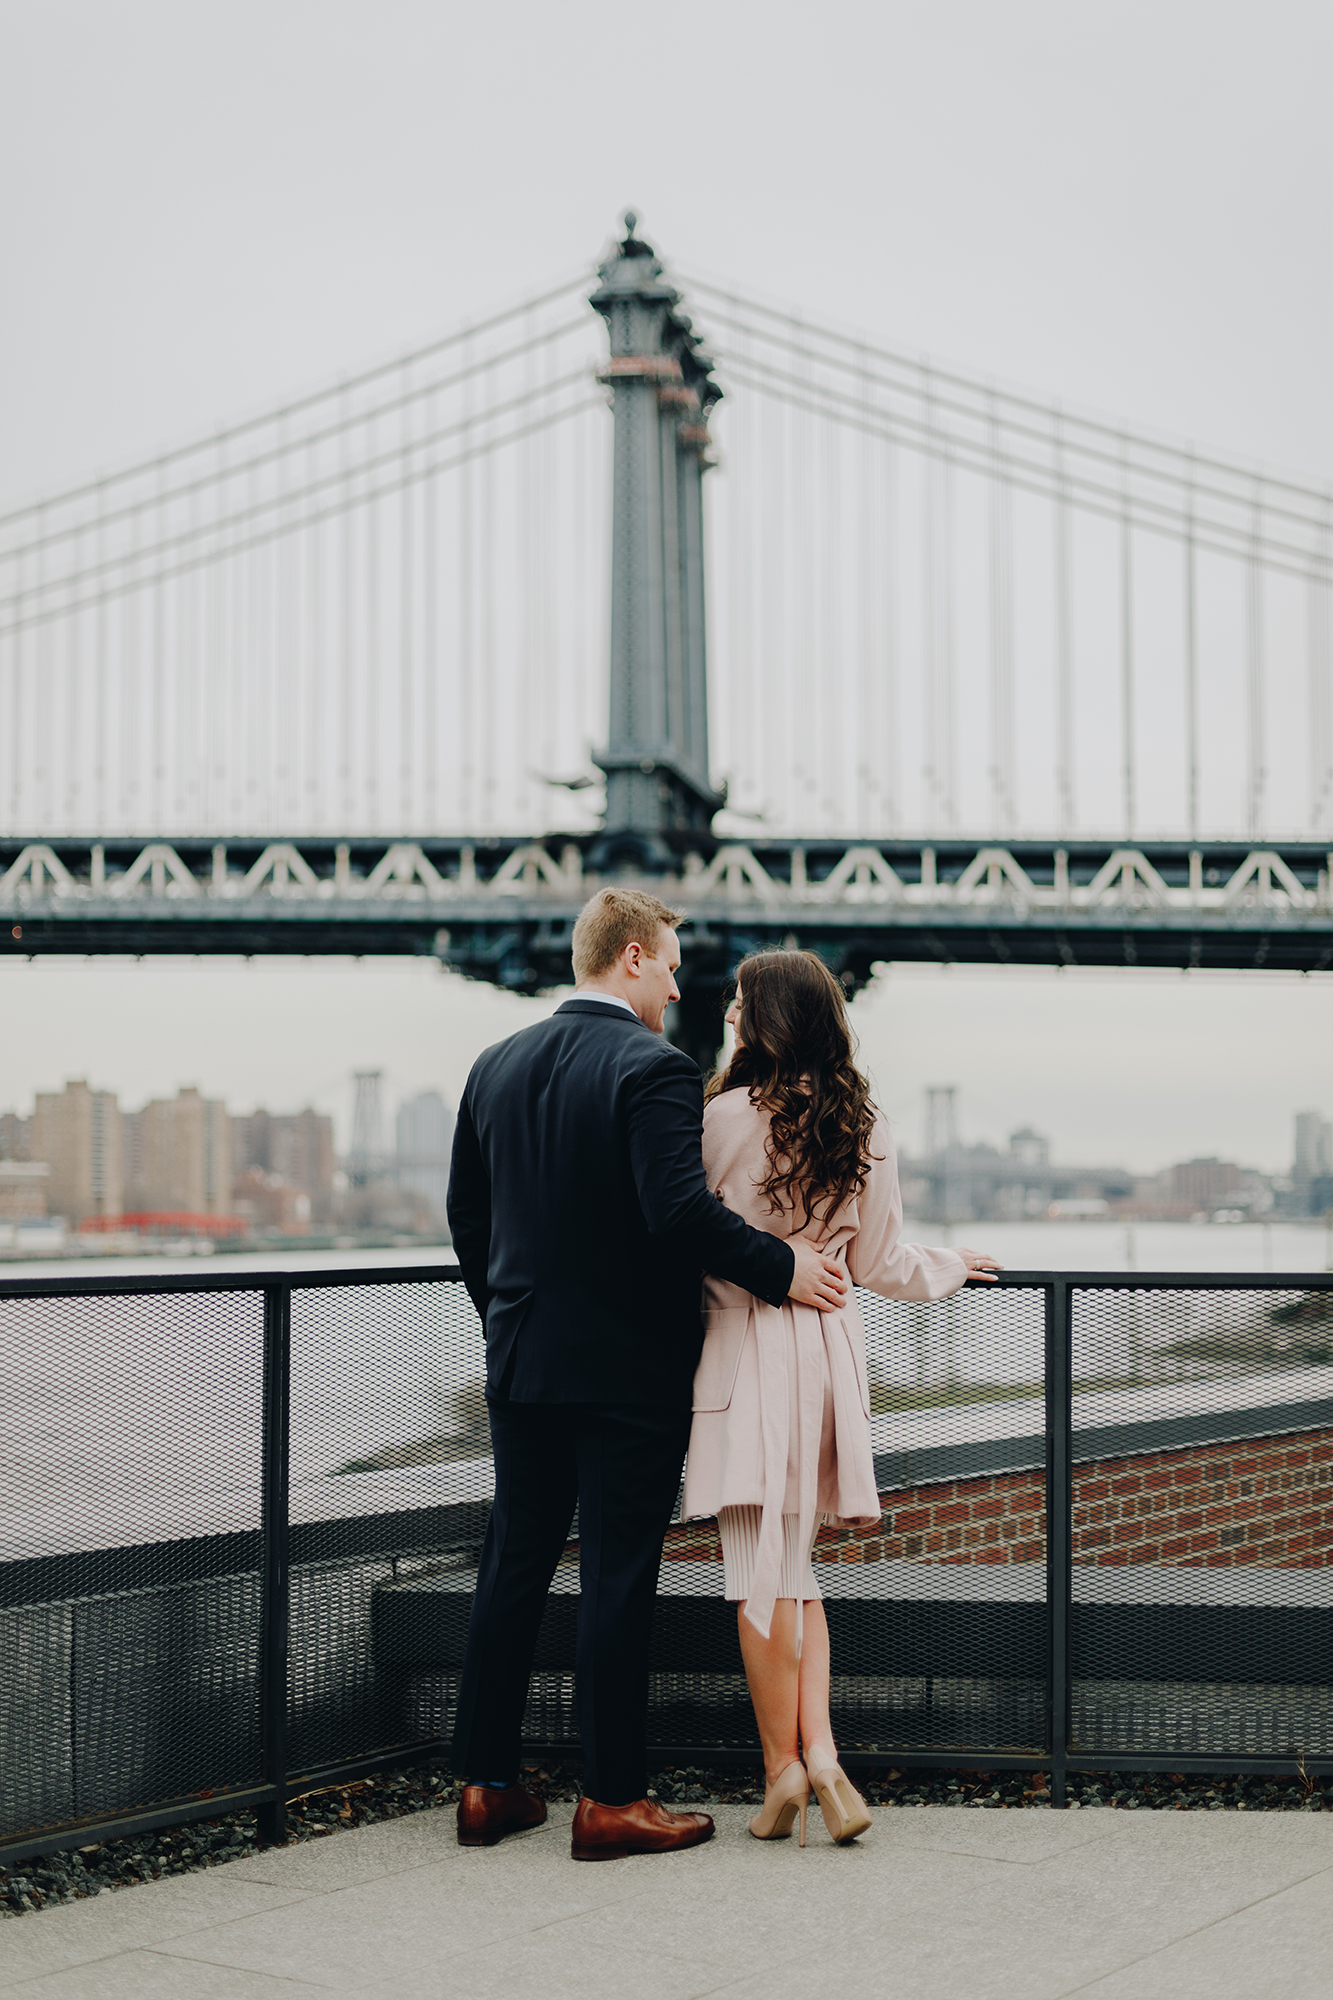 Timeless Dumbo Engagement Photography in Brooklyn, NY